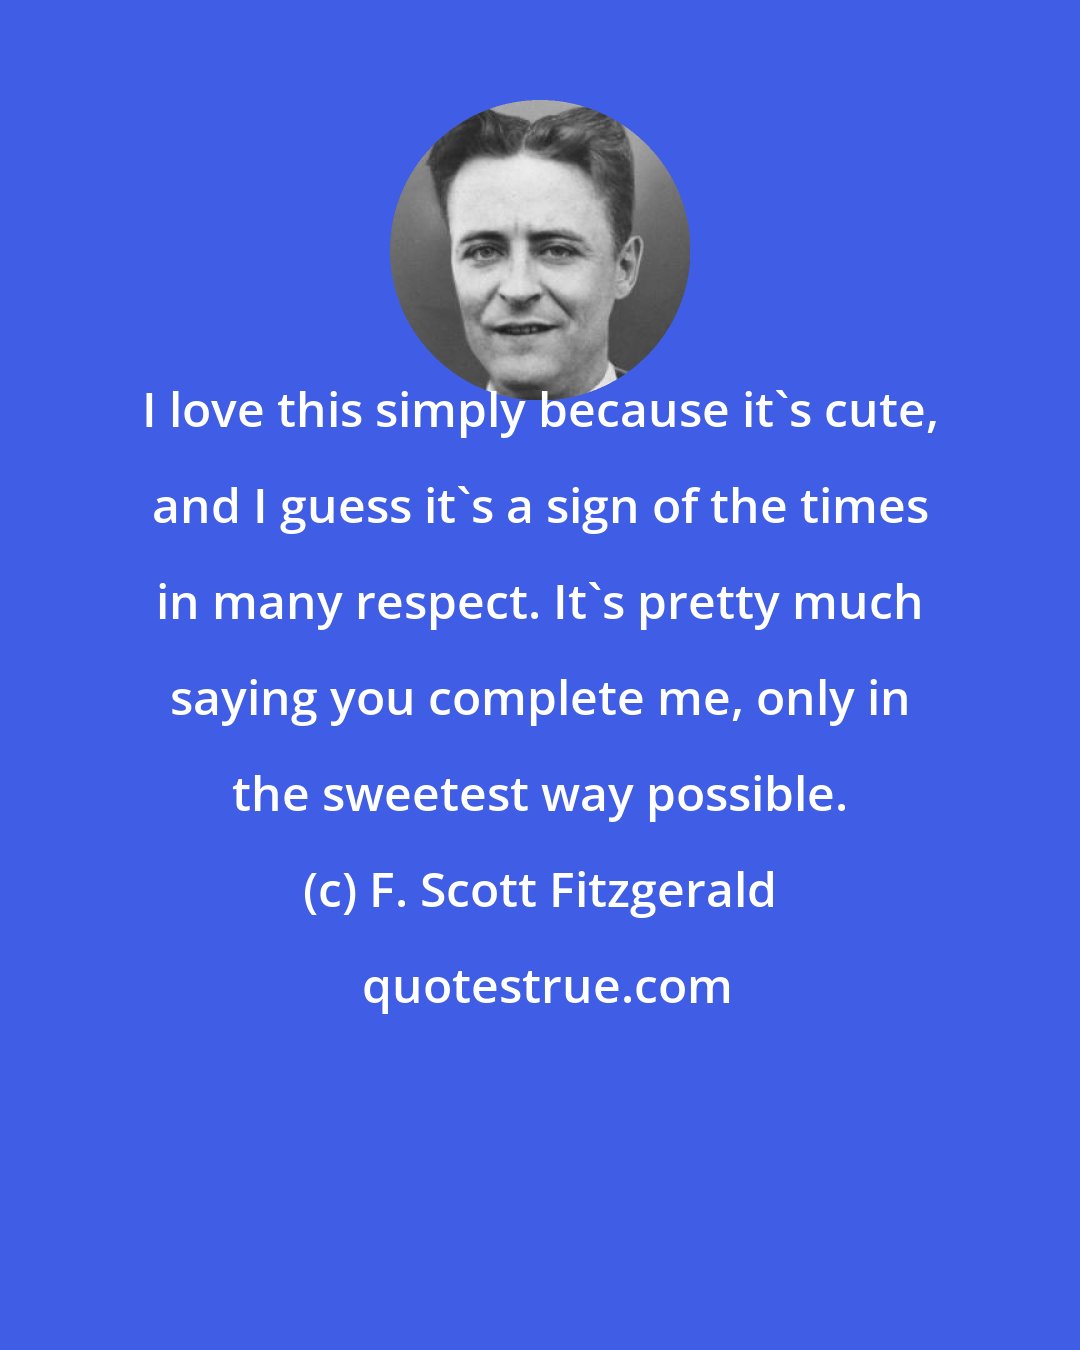 F. Scott Fitzgerald: I love this simply because it's cute, and I guess it's a sign of the times in many respect. It's pretty much saying you complete me, only in the sweetest way possible.